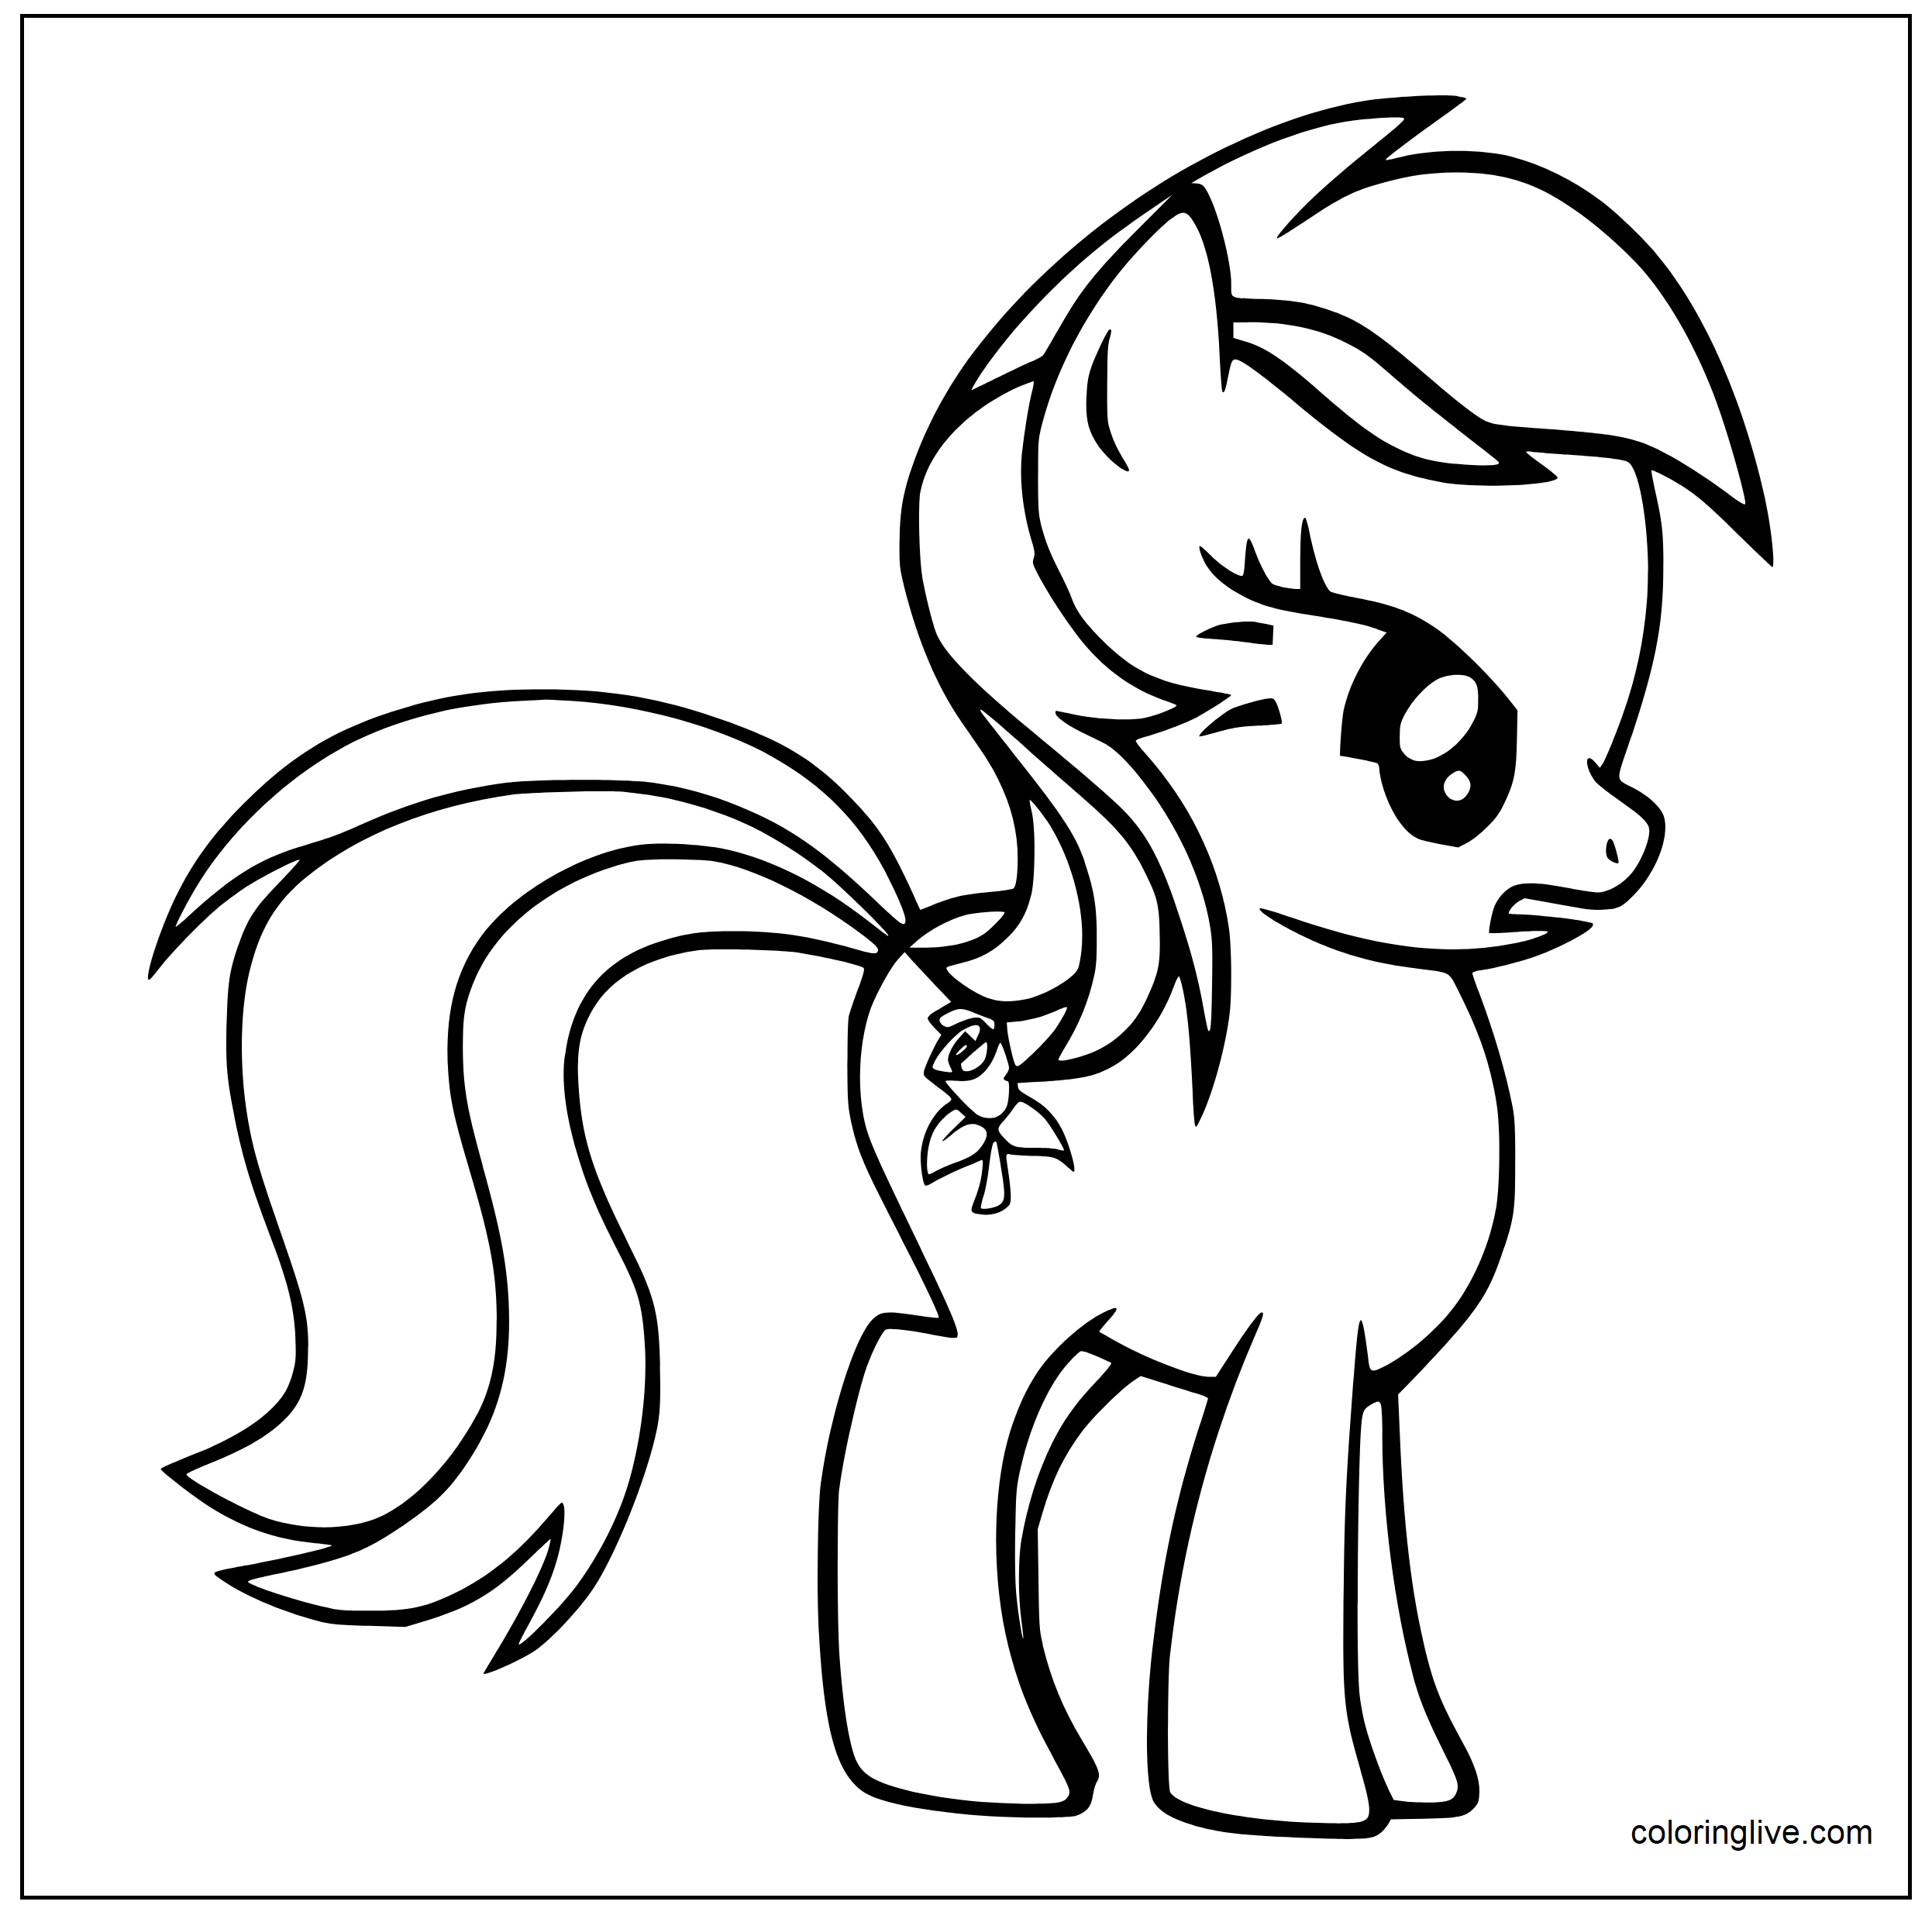 Printable Rose MLP Coloring Page for kids.